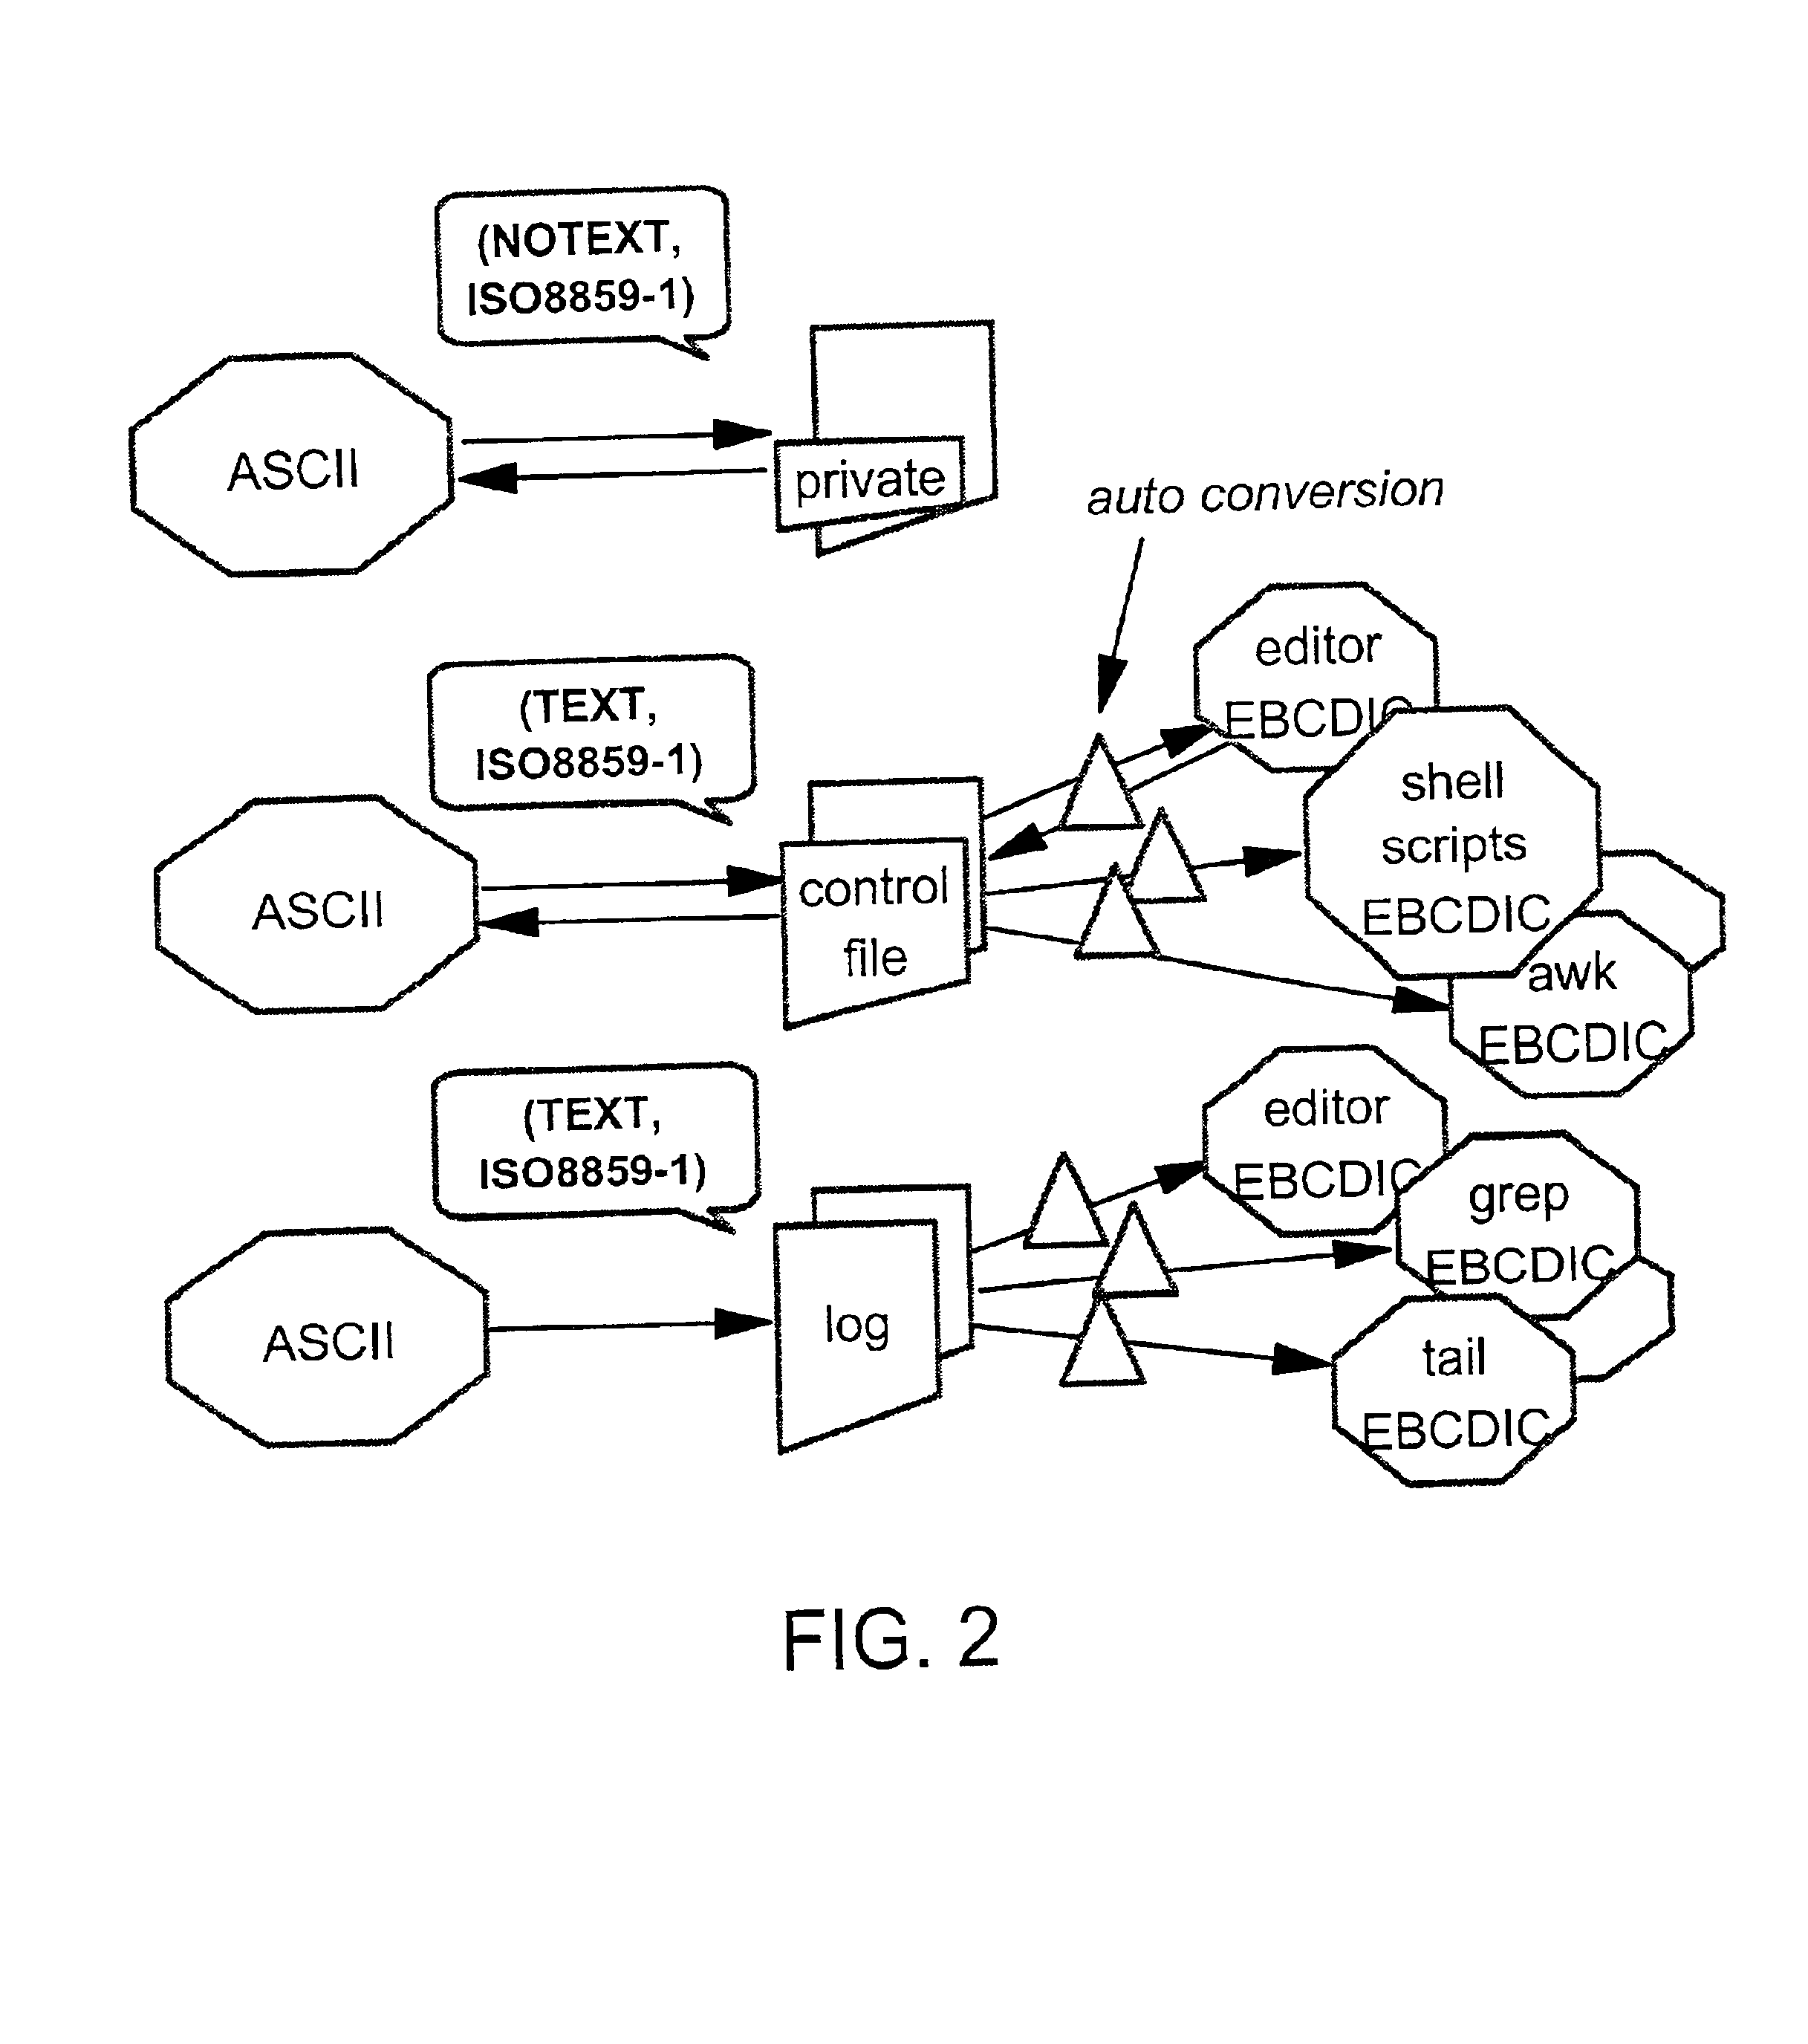 File tagging and automatic conversion of data or files